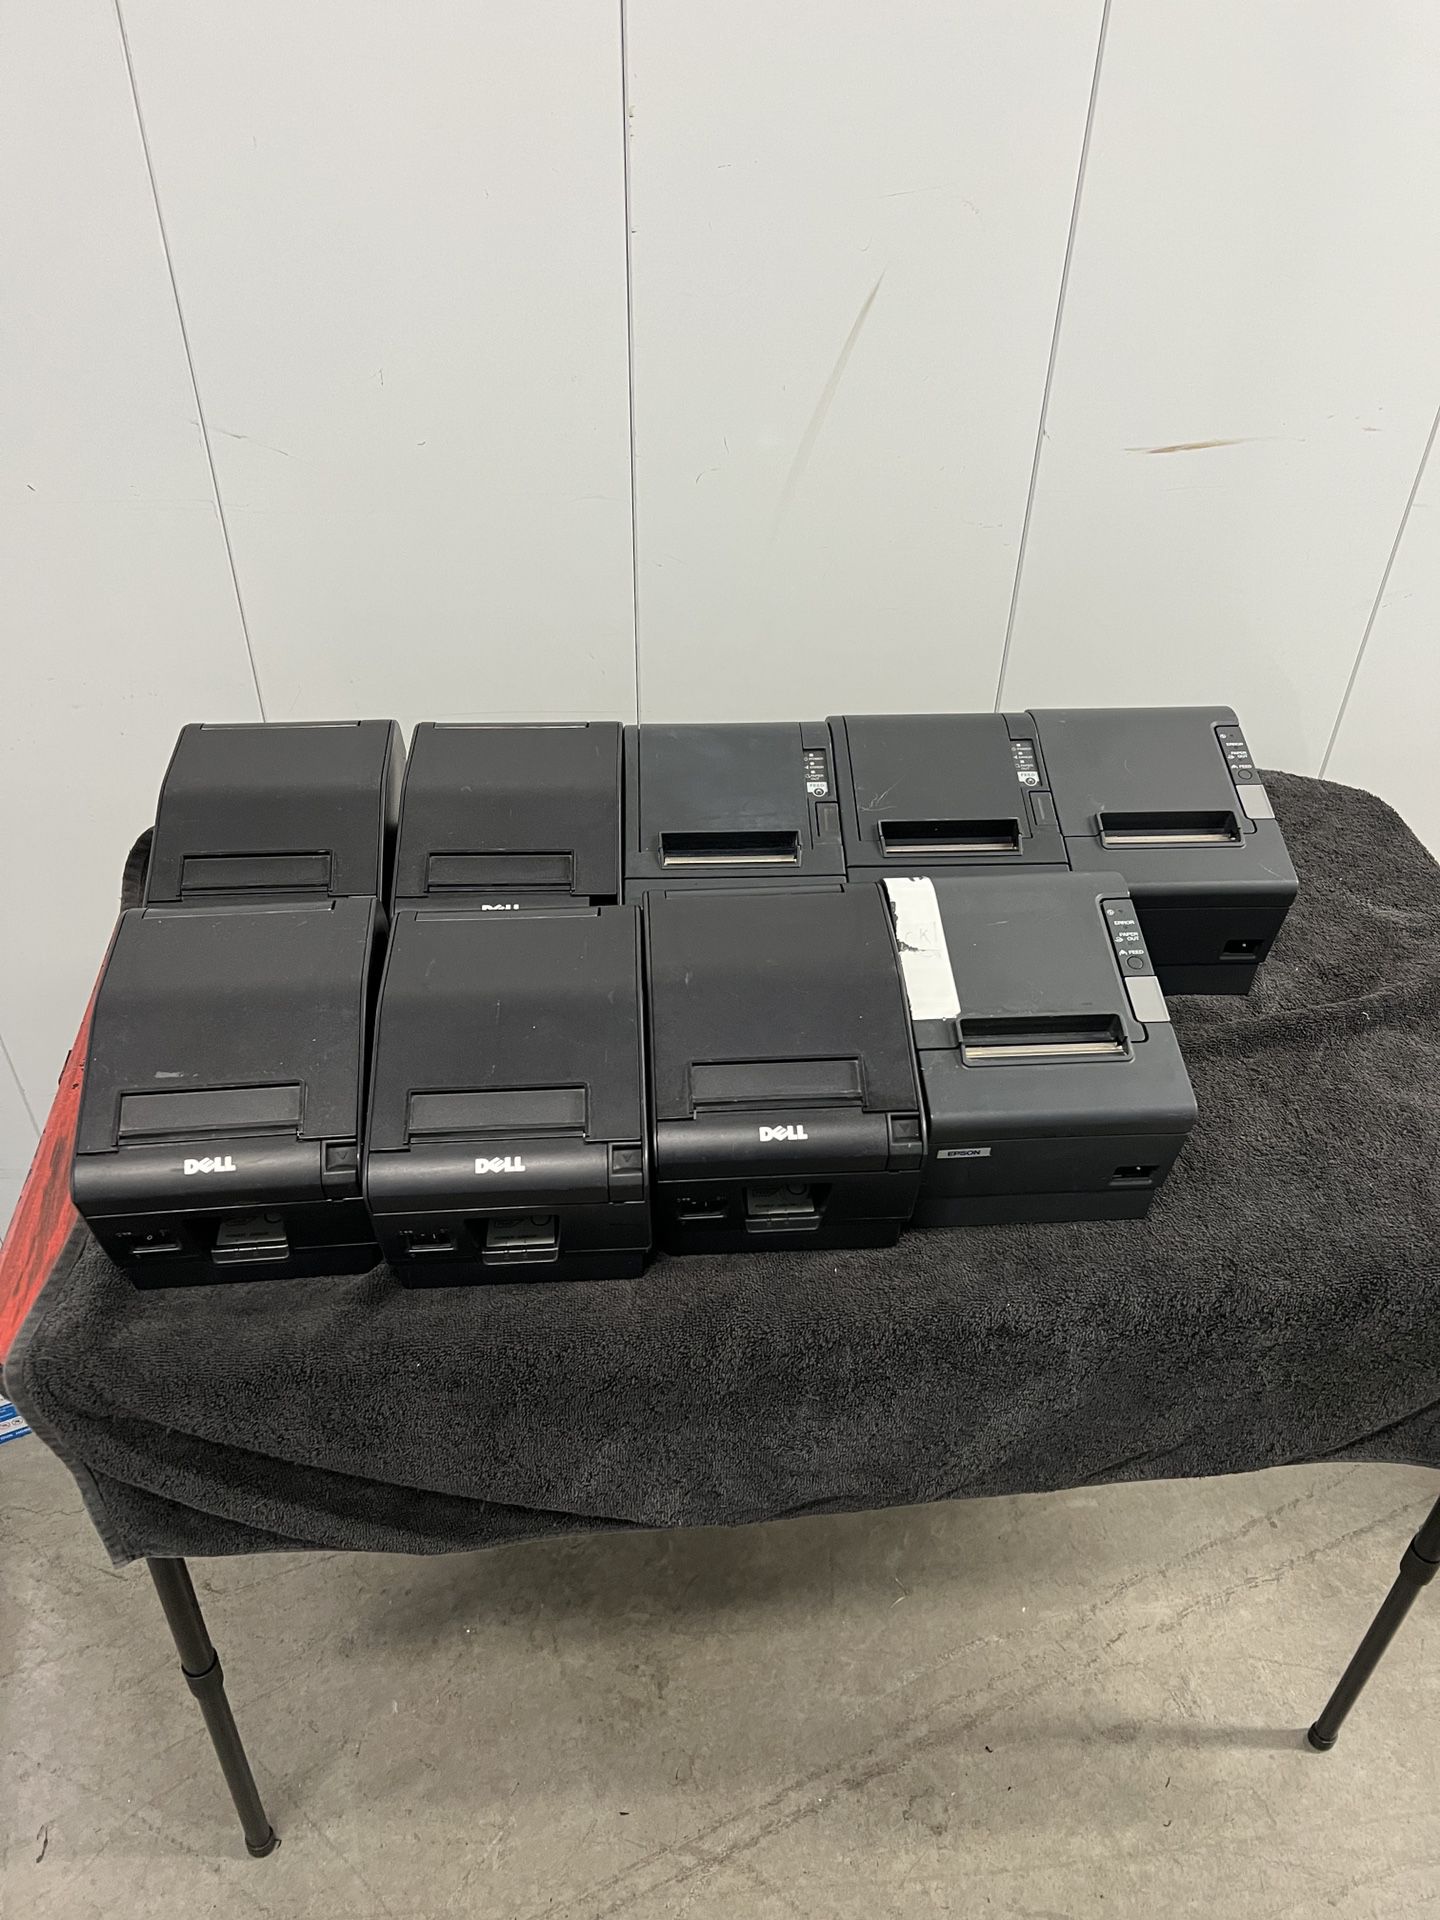 9 Thermal POS Receipt Printer’s  $65 For All Of Them!!!! Total !!